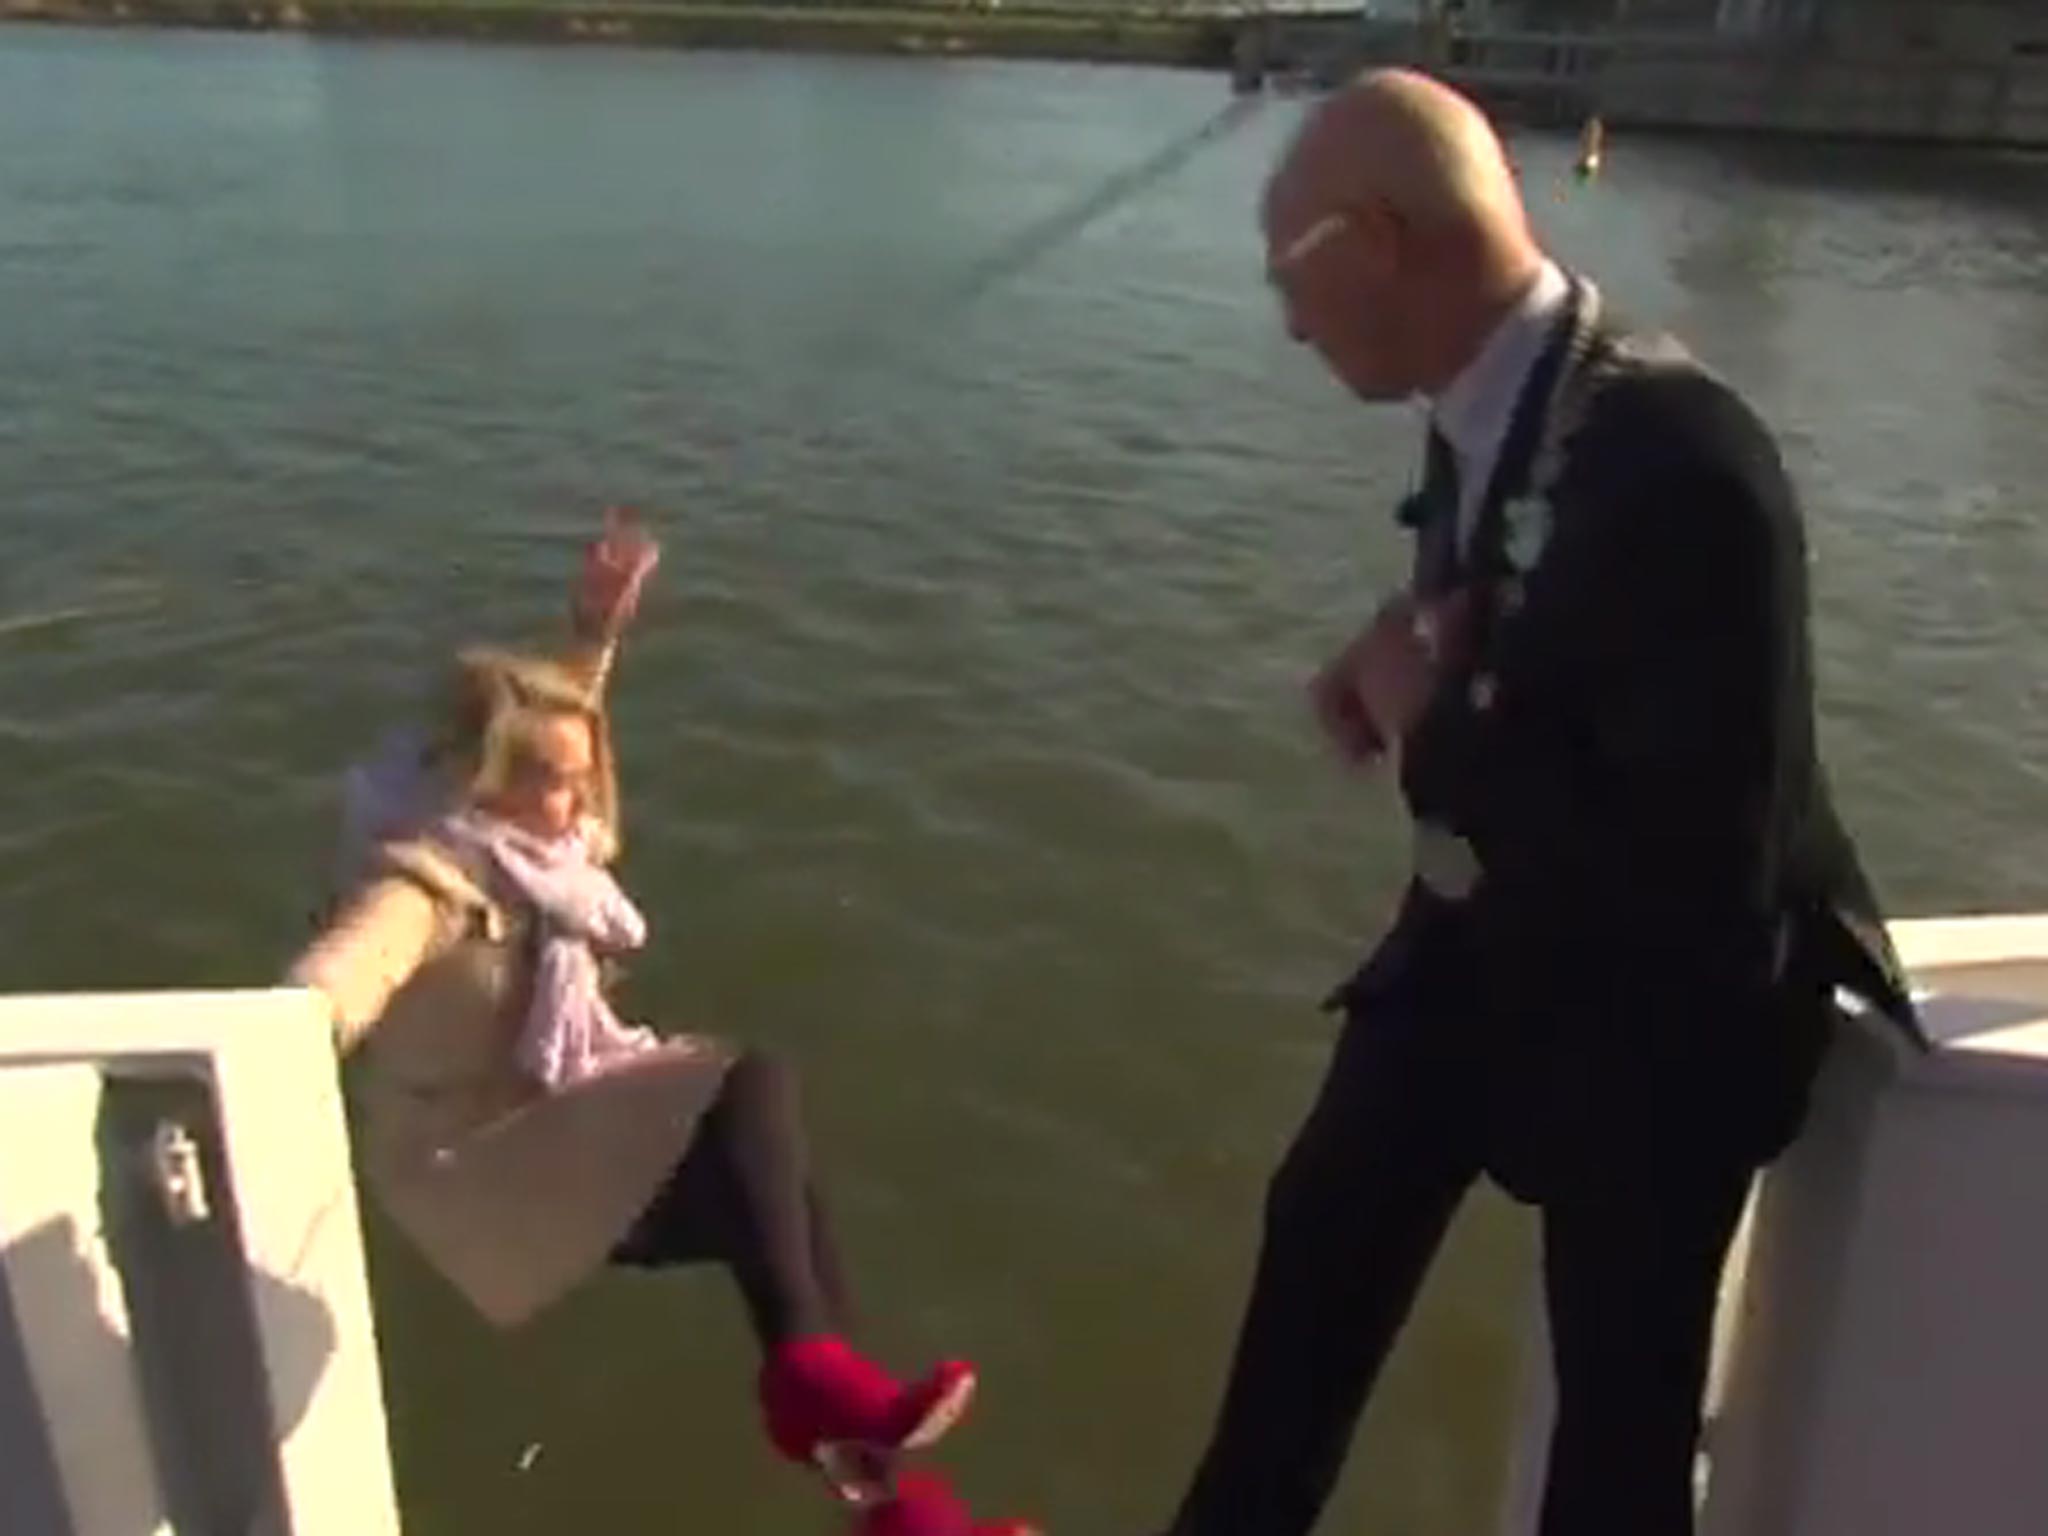 The moment the news reporter tumbles into the water